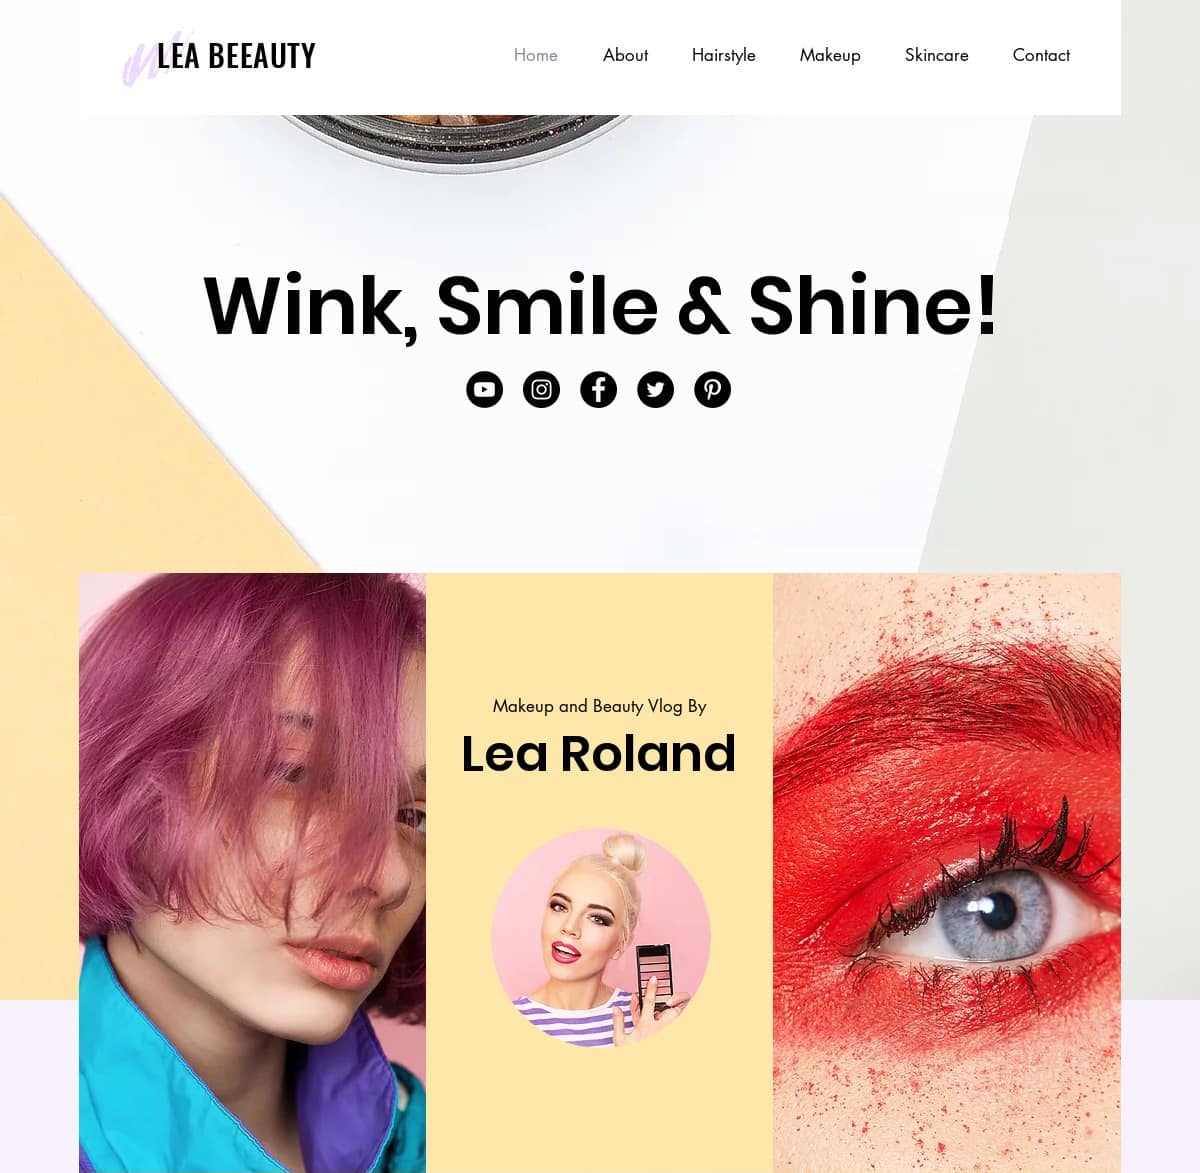 6 Best Wix Templates For Health and Wellness Websites-image7